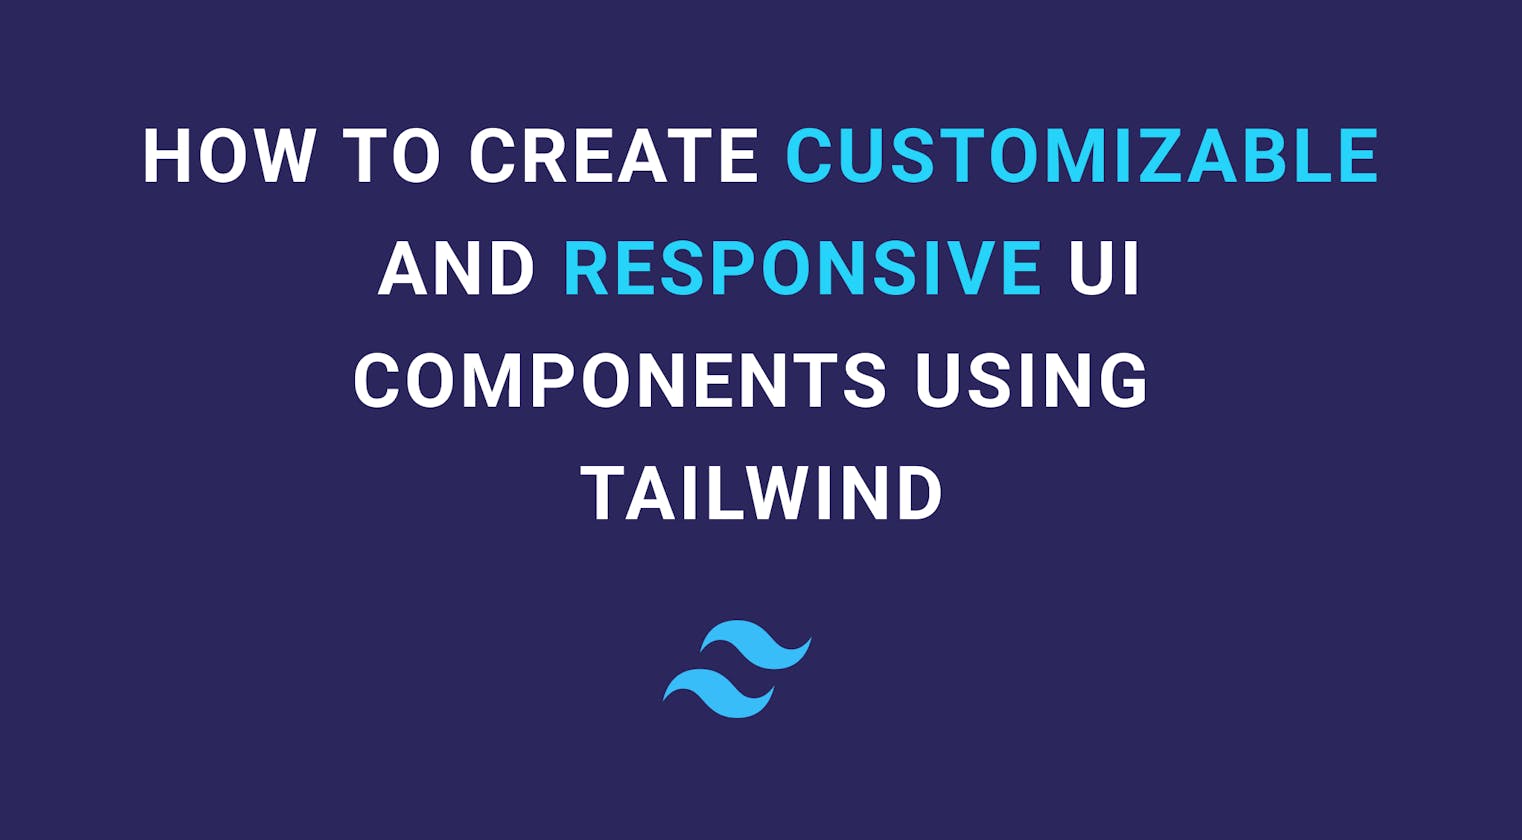 How To Create Customizable And Responsive UI Components Using Tailwind